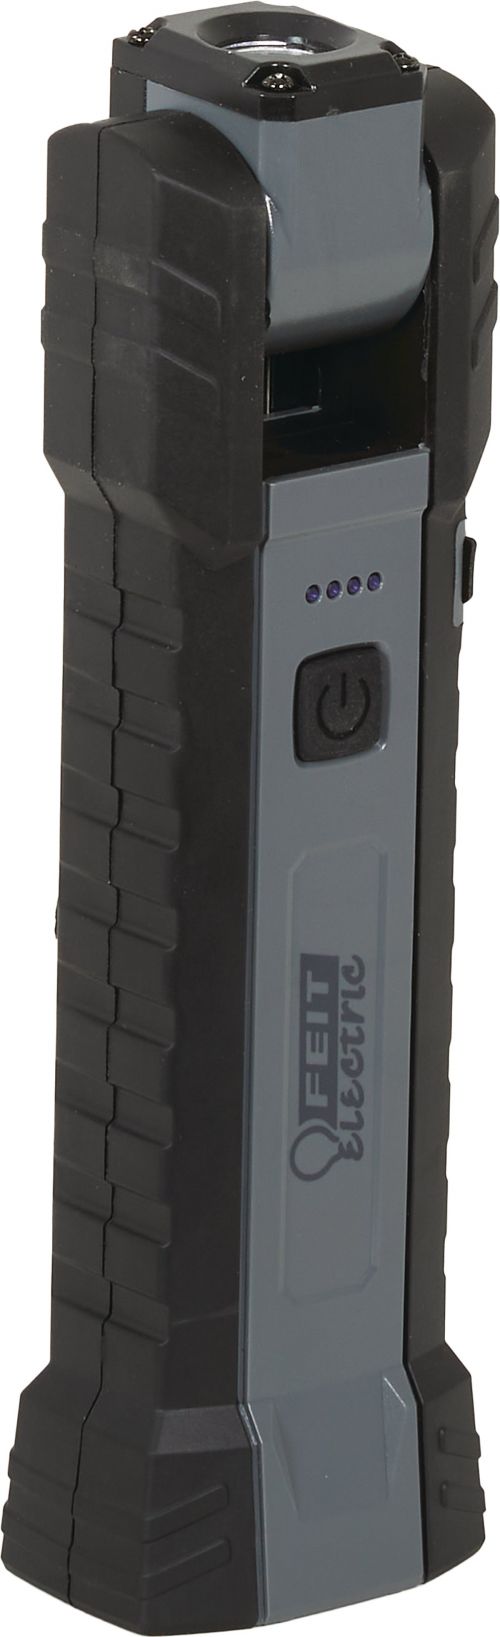 Feit Electric 500 Lm. LED Rechargeable Swivel Handheld Work Light